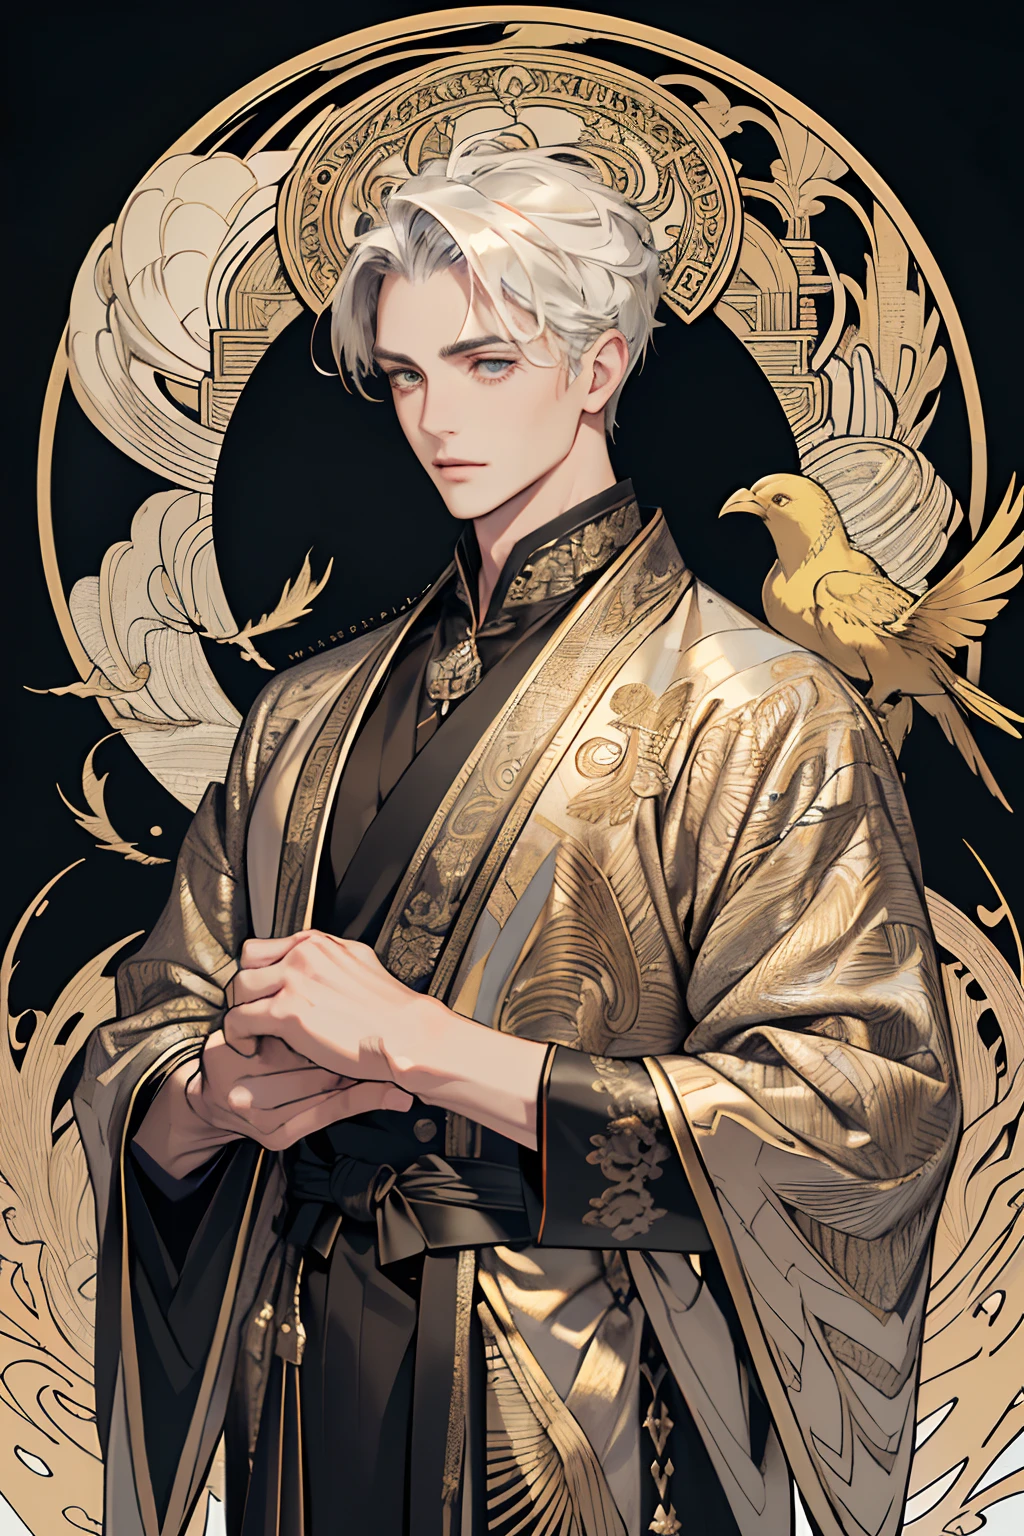 Realistic,  (Masterpiece, Top  Quality, Best Quality, formal art, beautiful and aesthetic:1.2), A highly detailed,Fractal Art,Colored,highest details,zentangle,(abstract background:1.3)
(1boy:1.3), (Golden Birds),
silverhair, Shining eyes,hair slicked back, short hair hair, Black robe,